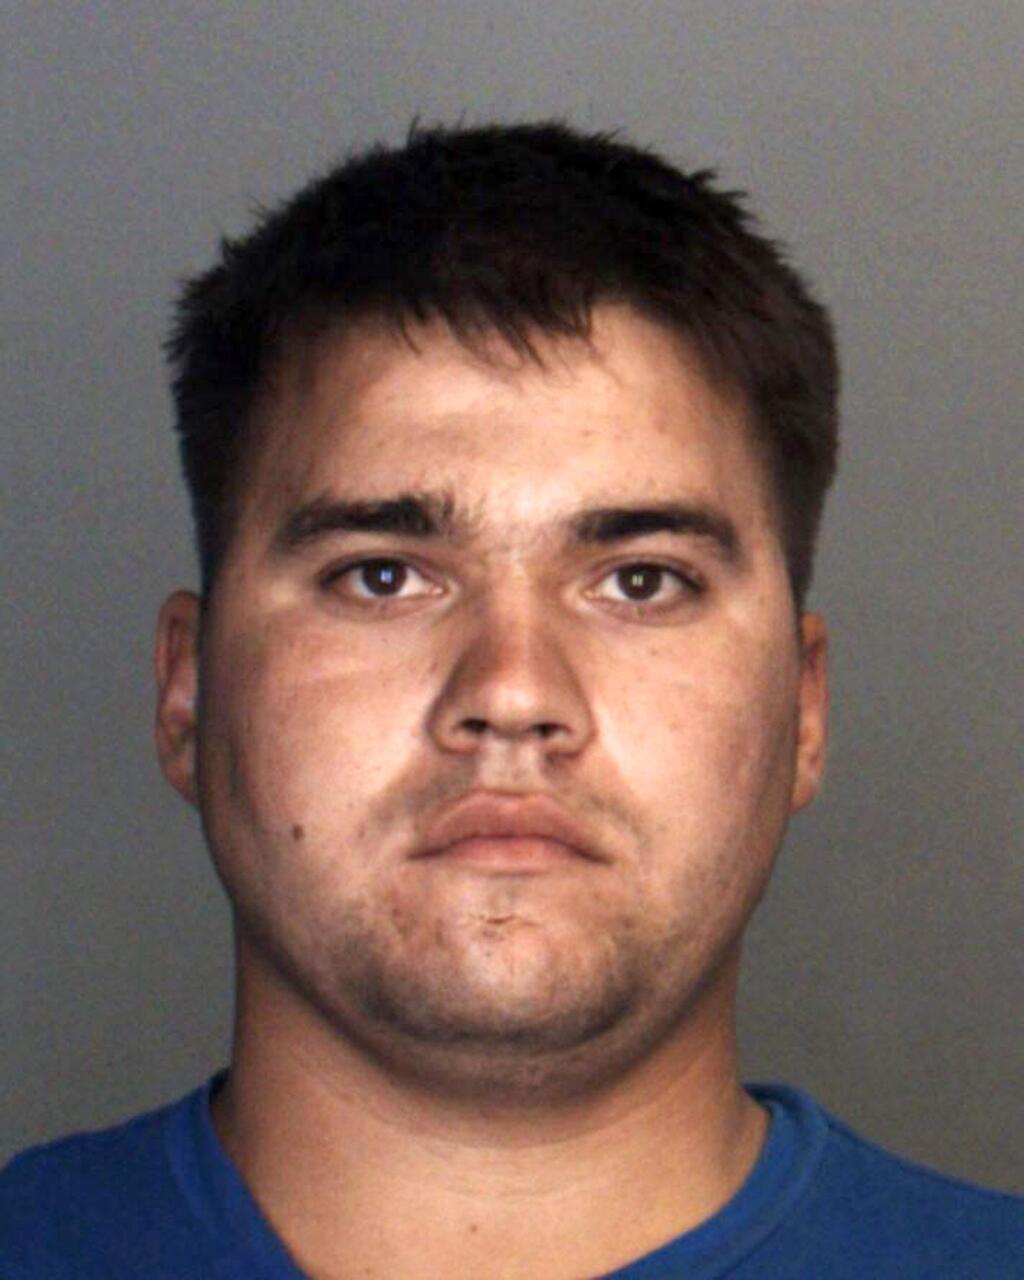 This undated photo released by the San Bernardino County, Calif., Sheriff's Department shows Christopher Brandon Lee after an arrest in another investigation. The body of the missing, pregnant wife of a U.S. Marine has been found deep in an abandoned mine shaft in Southern California, where her husband had been stationed. Sheriff John McMahon said Monday, Aug. 18, 2014, that the remains of 20-year-old Erin Corwin were found Saturday, Aug. 16, and were identified by dental records Sunday. Her alleged lover and former neighbor, Christopher Brandon Lee, 24, was arrested at 9 p.m. Sunday at a traffic stop in Anchorage, Alaska, on an extradition warrant out of California. (AP Photo/San Bernardino County Sheriff)